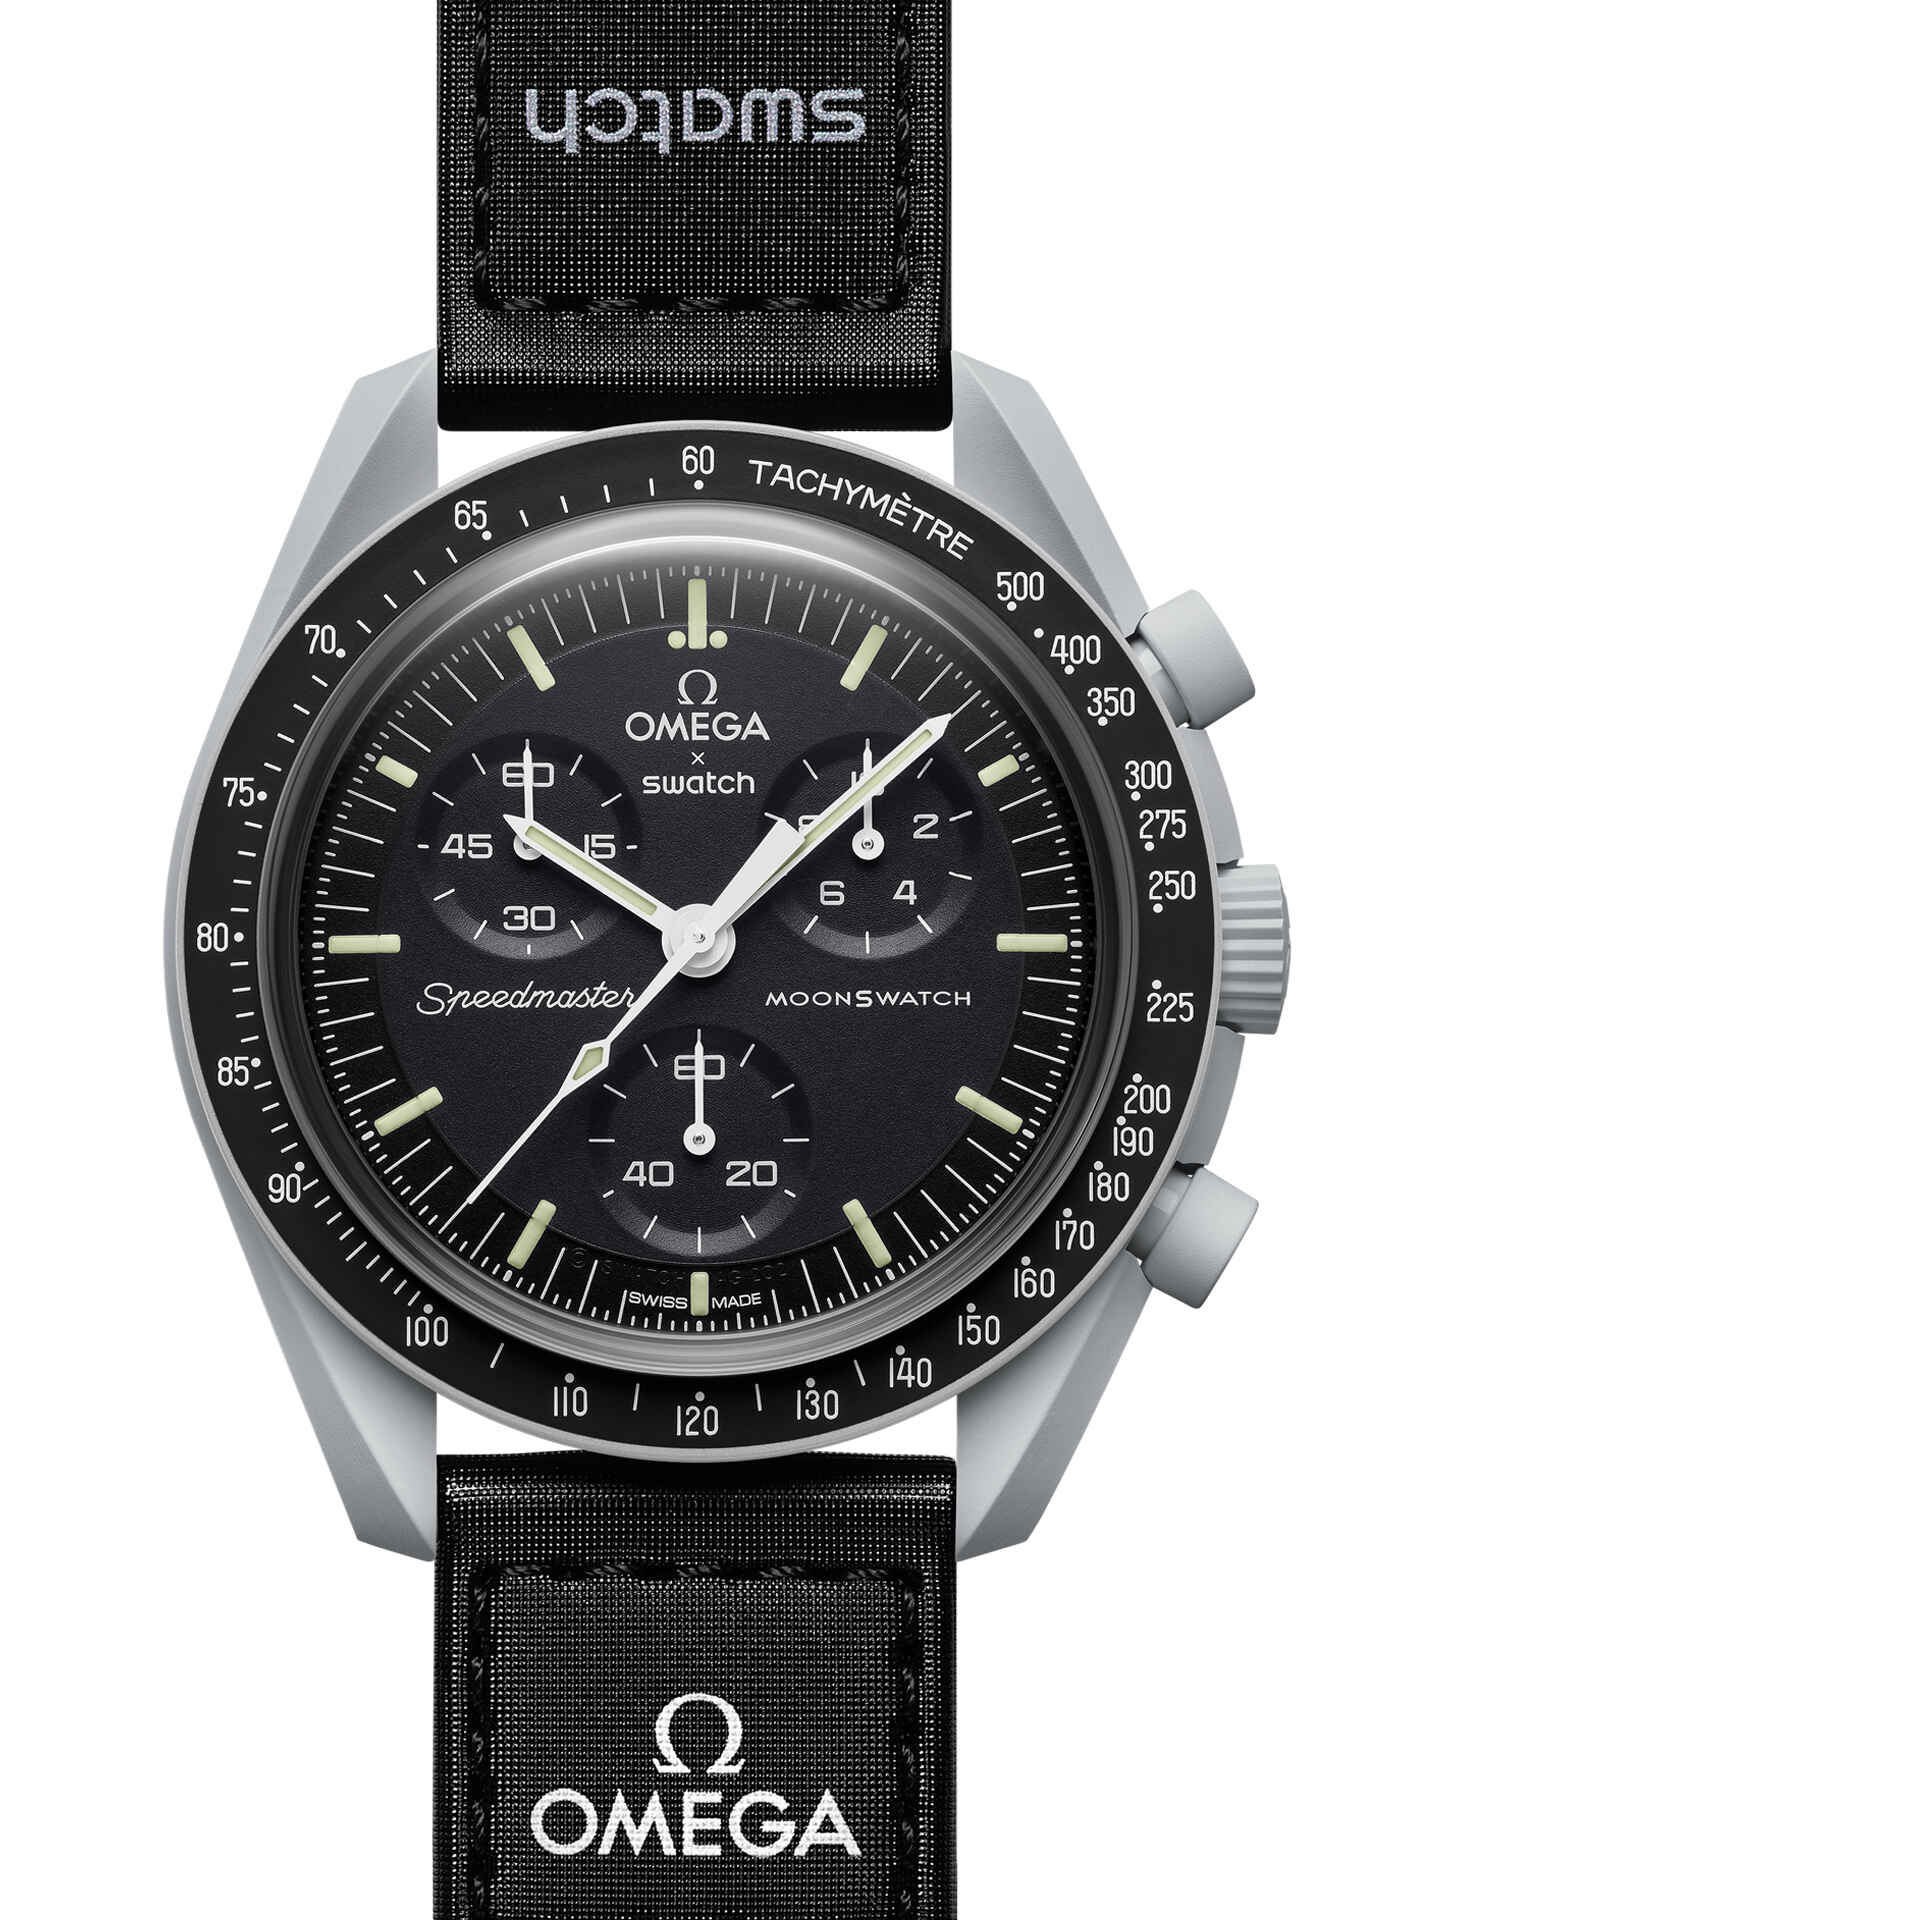 Swatch × OMEGA MISSION TO THE MOON-